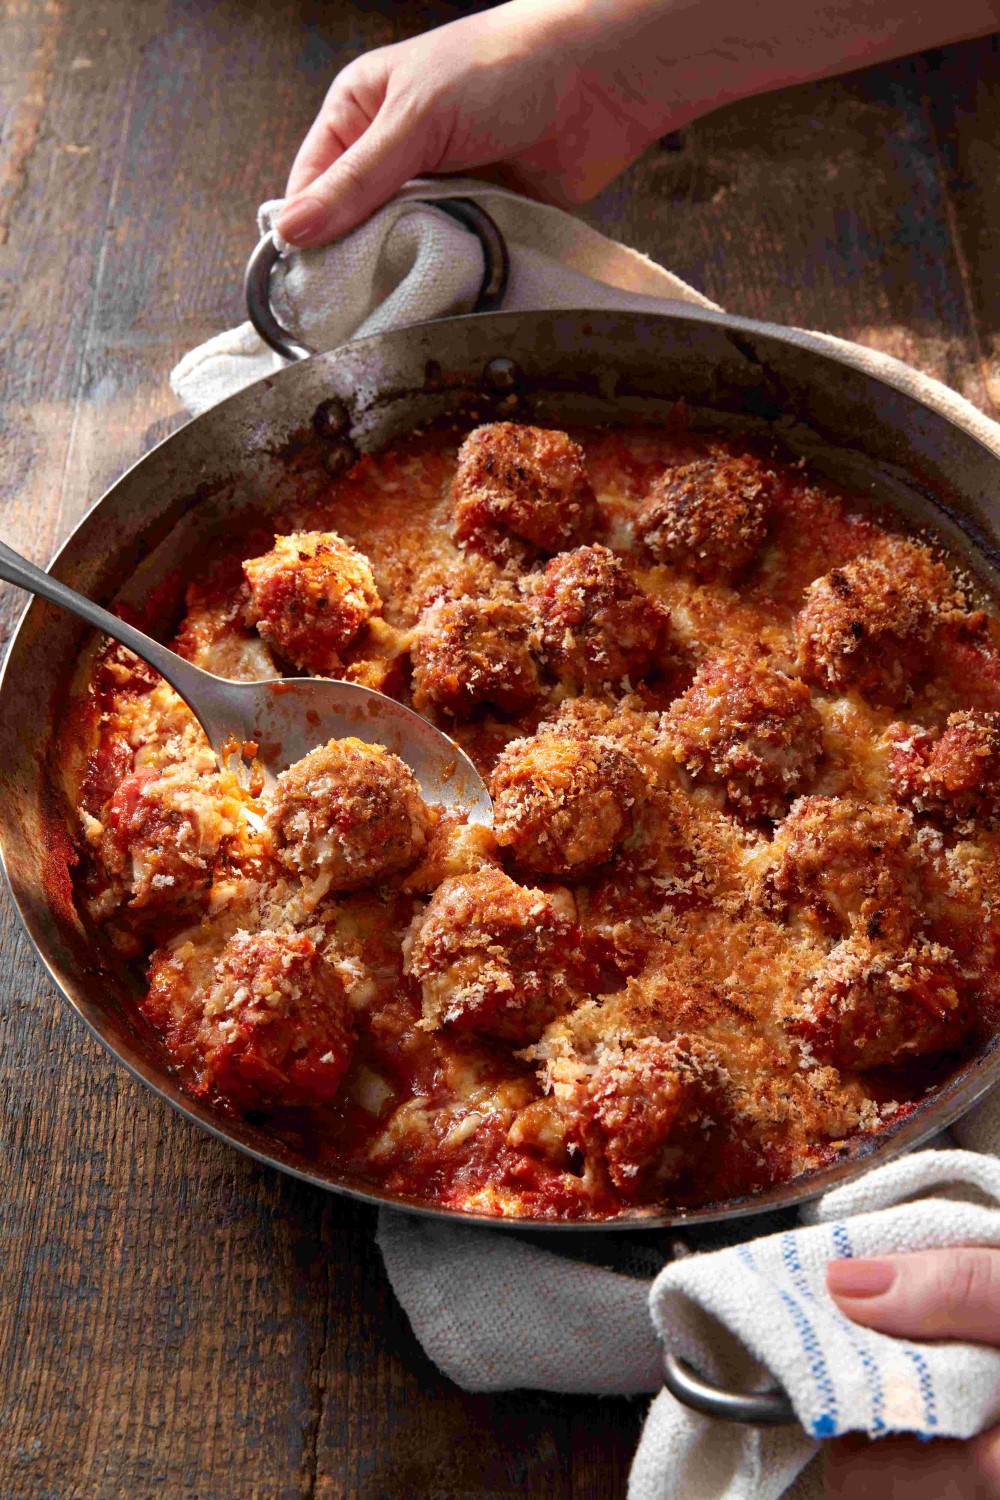 A LovePork recipe of meatballs in tomato sauce with a cheesy crumb.